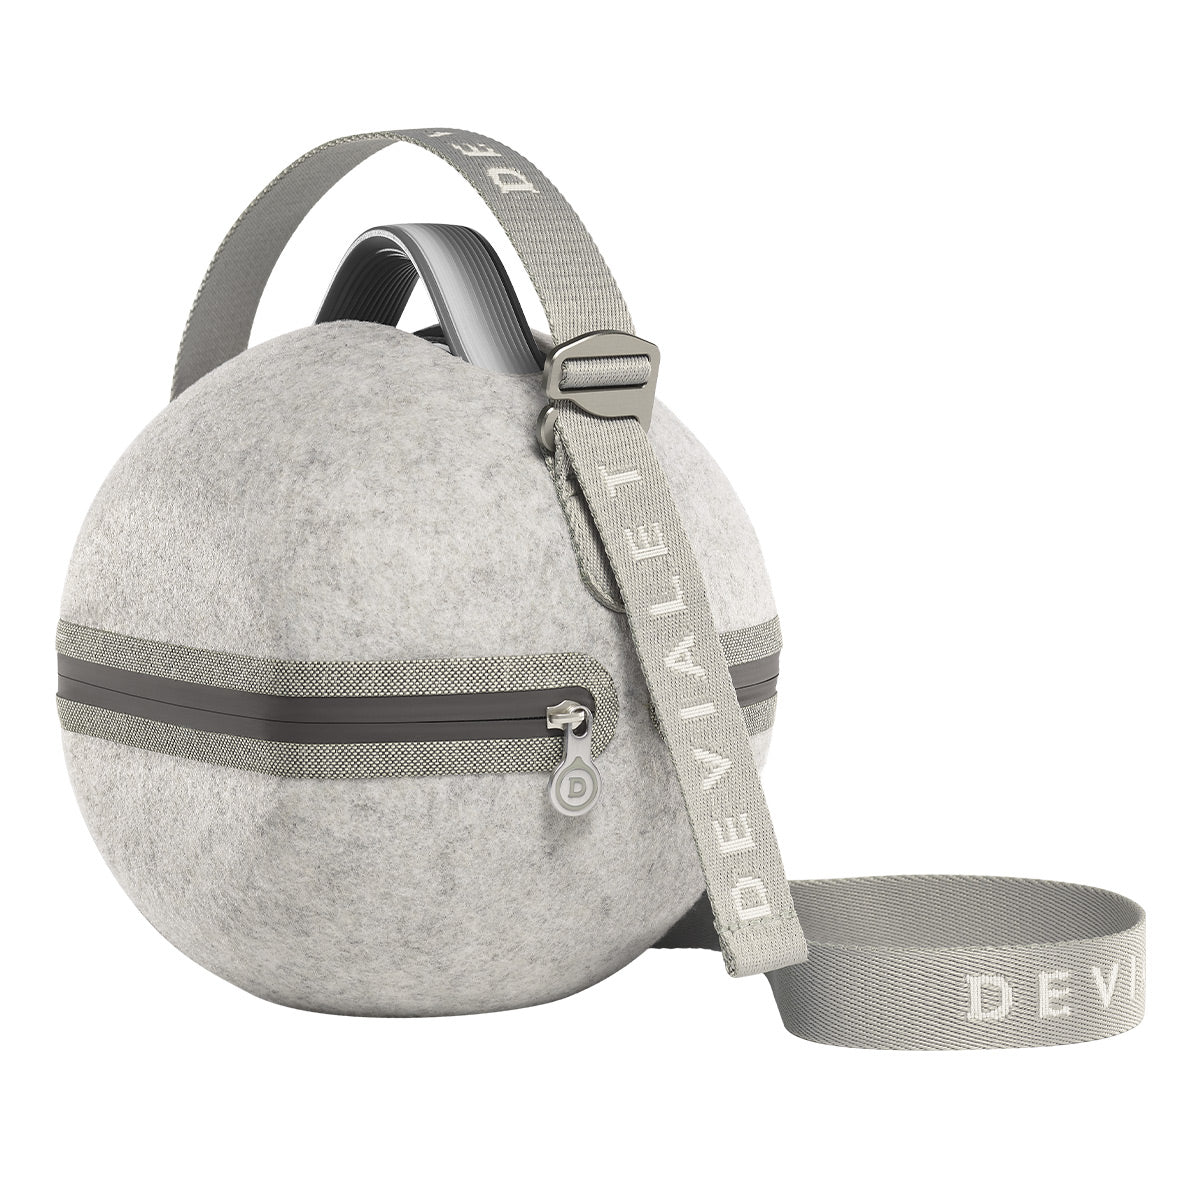 Devialet Mania Portable Bluetooth Smart Speaker (Light Grey) with Cocoon Felt Carrying Case